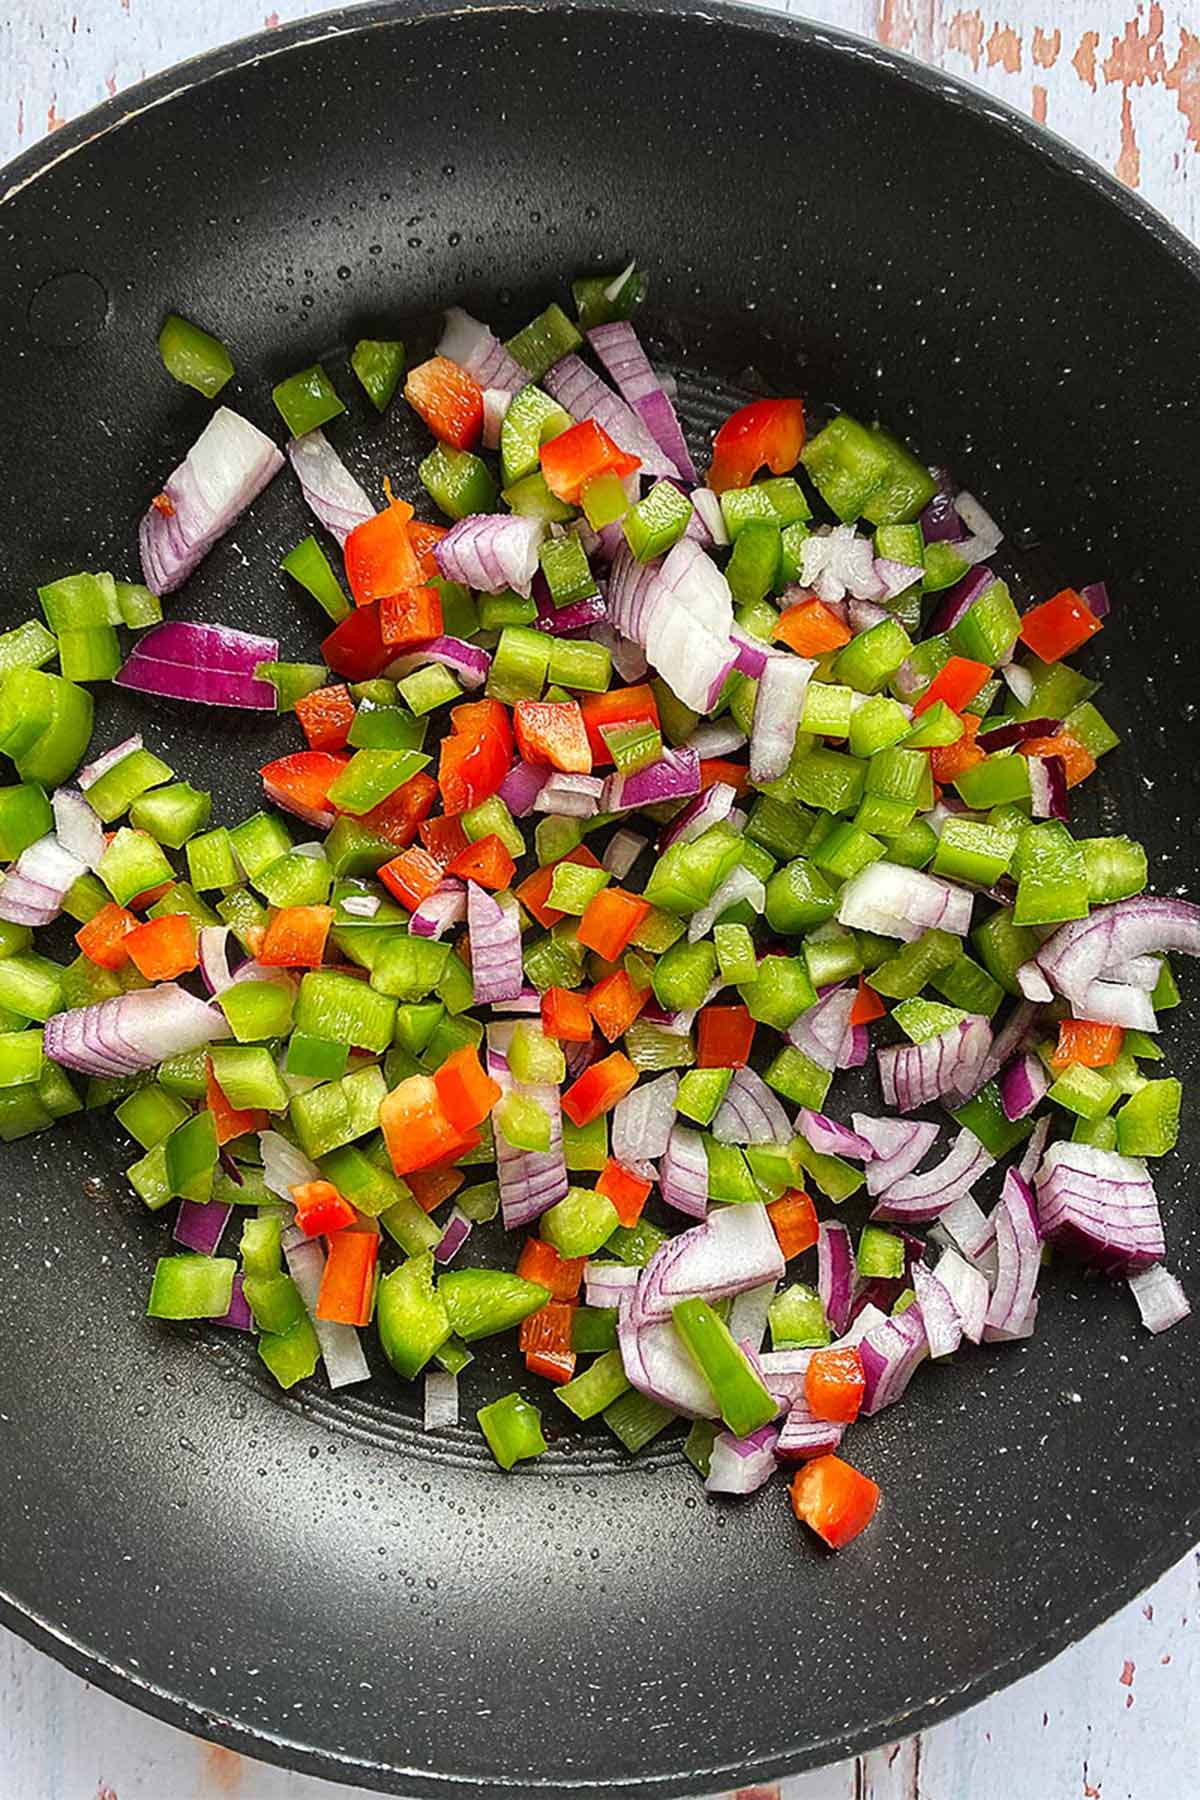 Chopped onion and bell pepper cooking in a frying pan.